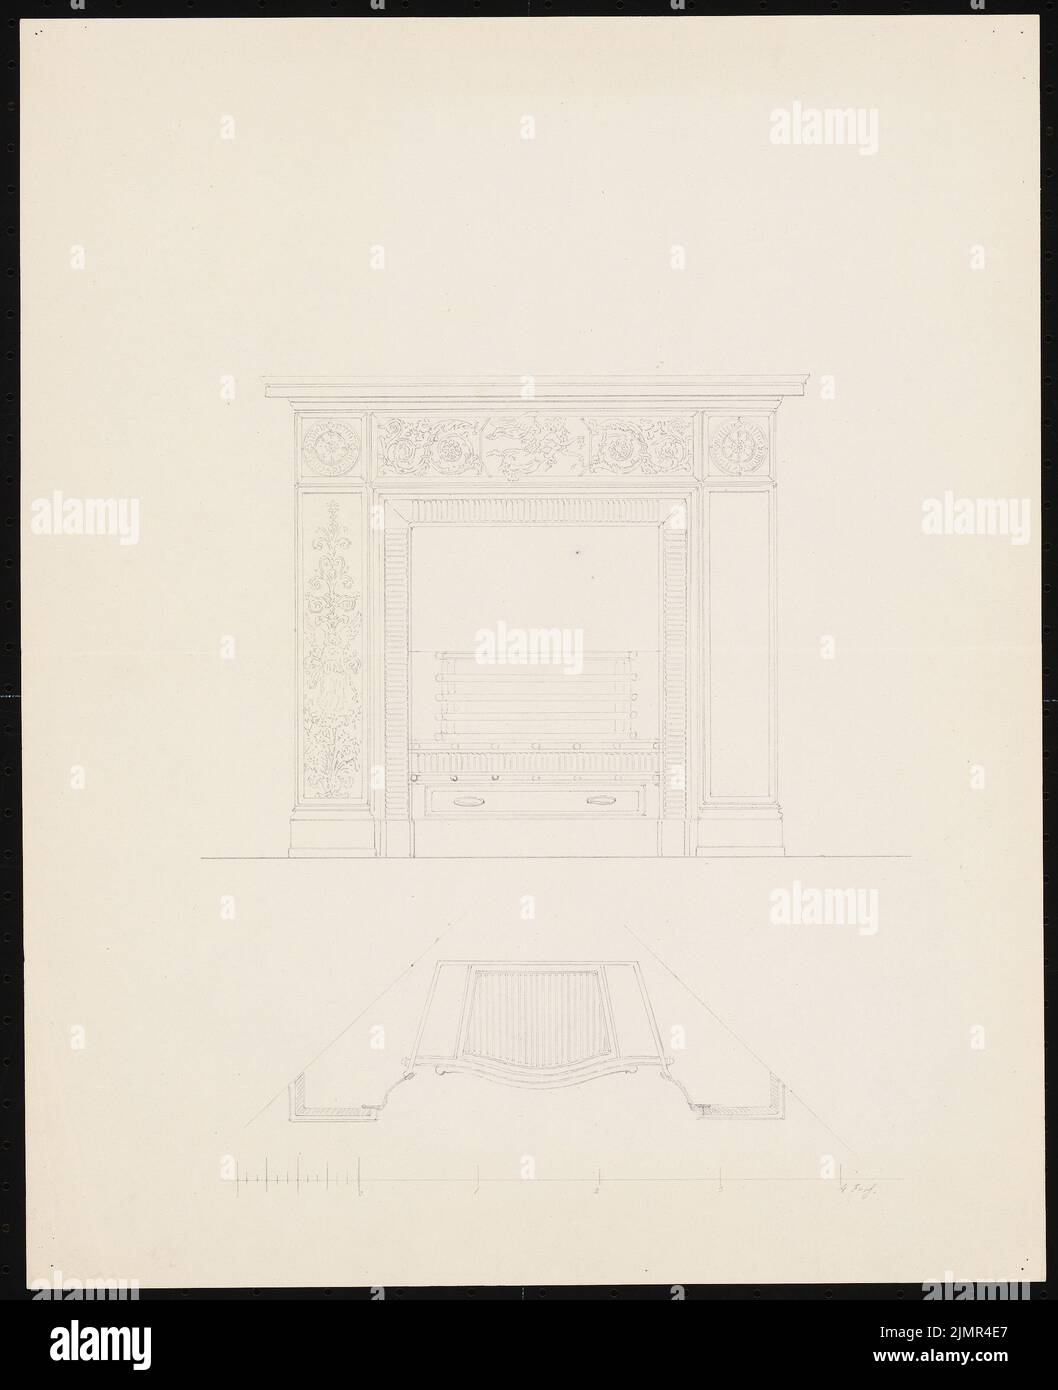 Knoblauch Eduard (1801-1865), fireplace (without date): View of a fireplace. Material/technology N.N. recorded, 43.7 x 35.6 cm (including scan edges) Knoblauch Eduard  (1801-1865): Kamin Stock Photo